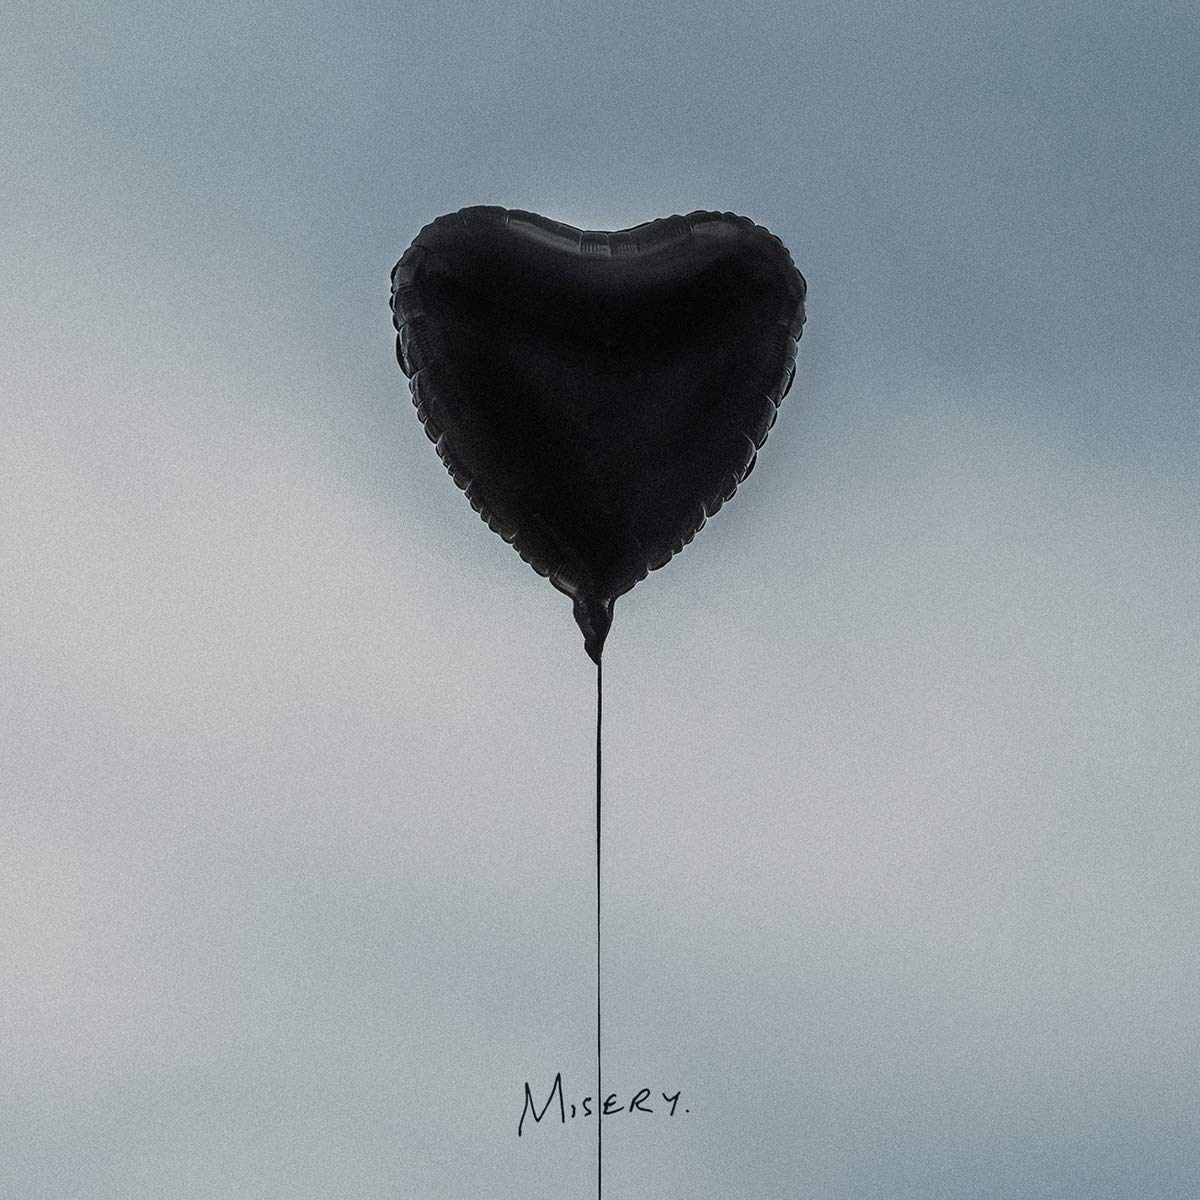 The Amity Affliction Misery Full Album Download